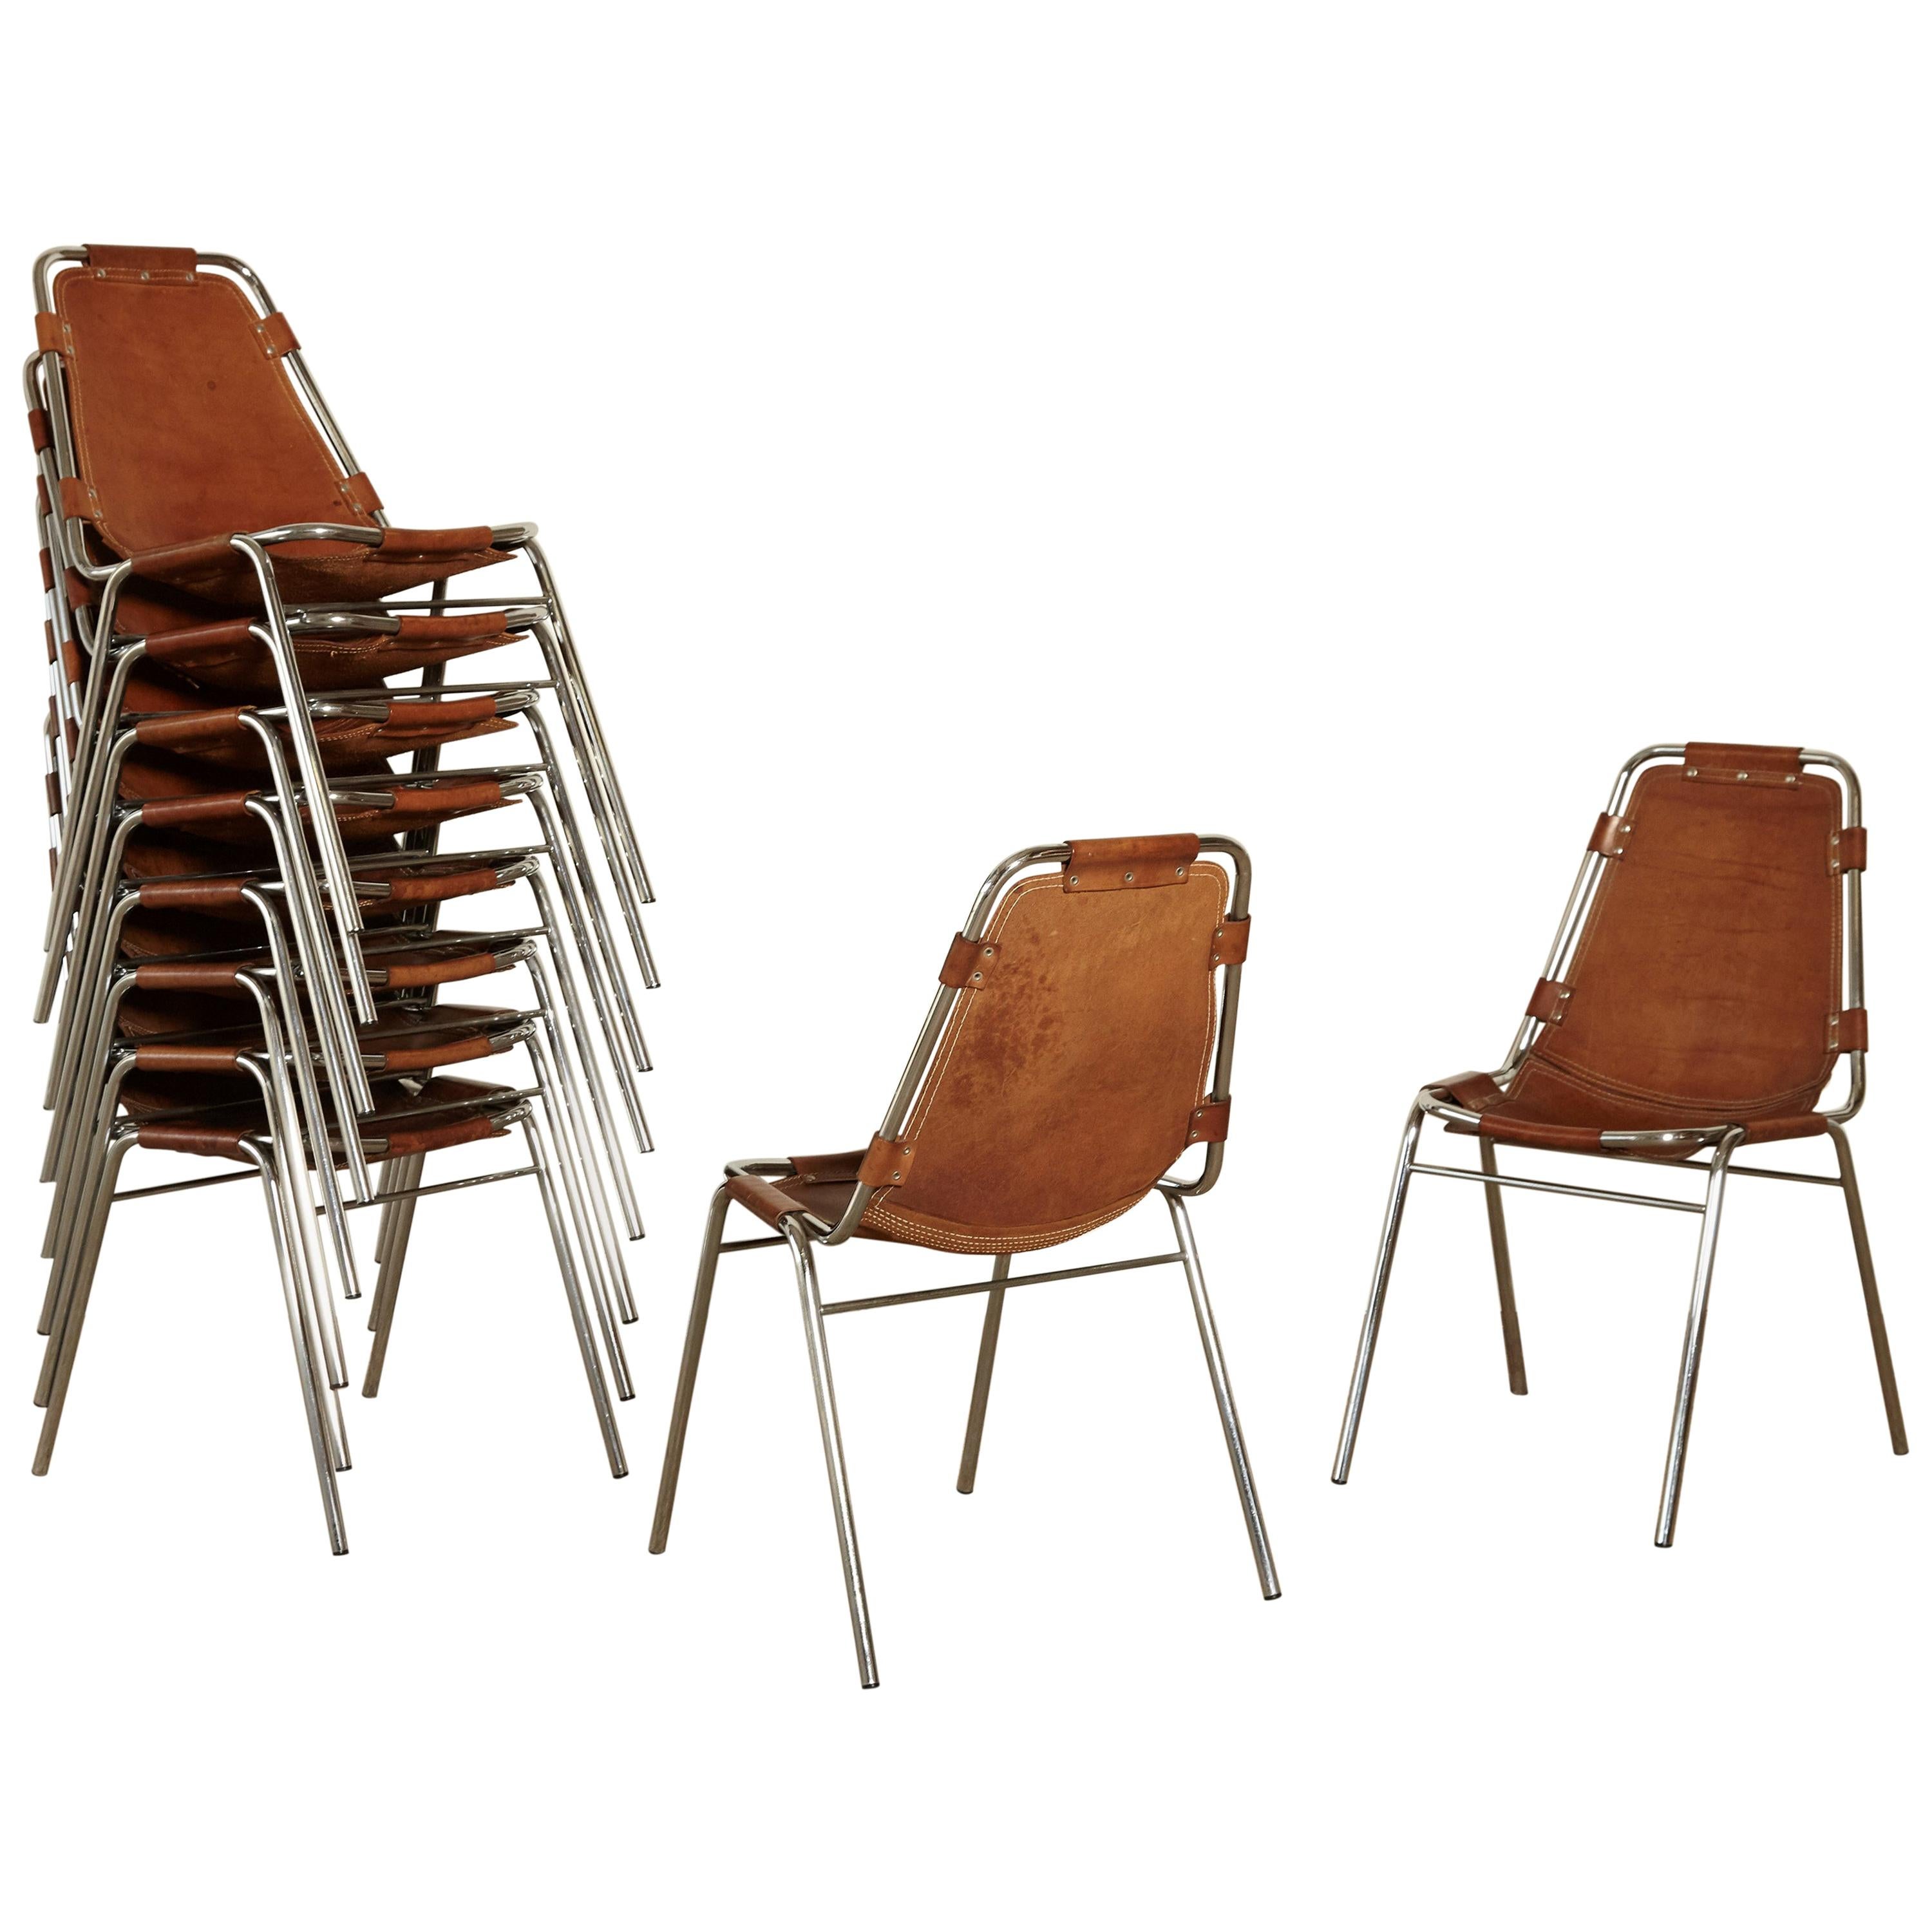 Set of 12 / 10 / 8 / 6 'Les Arcs' Chairs Selected by Charlotte Perriand, 1970s